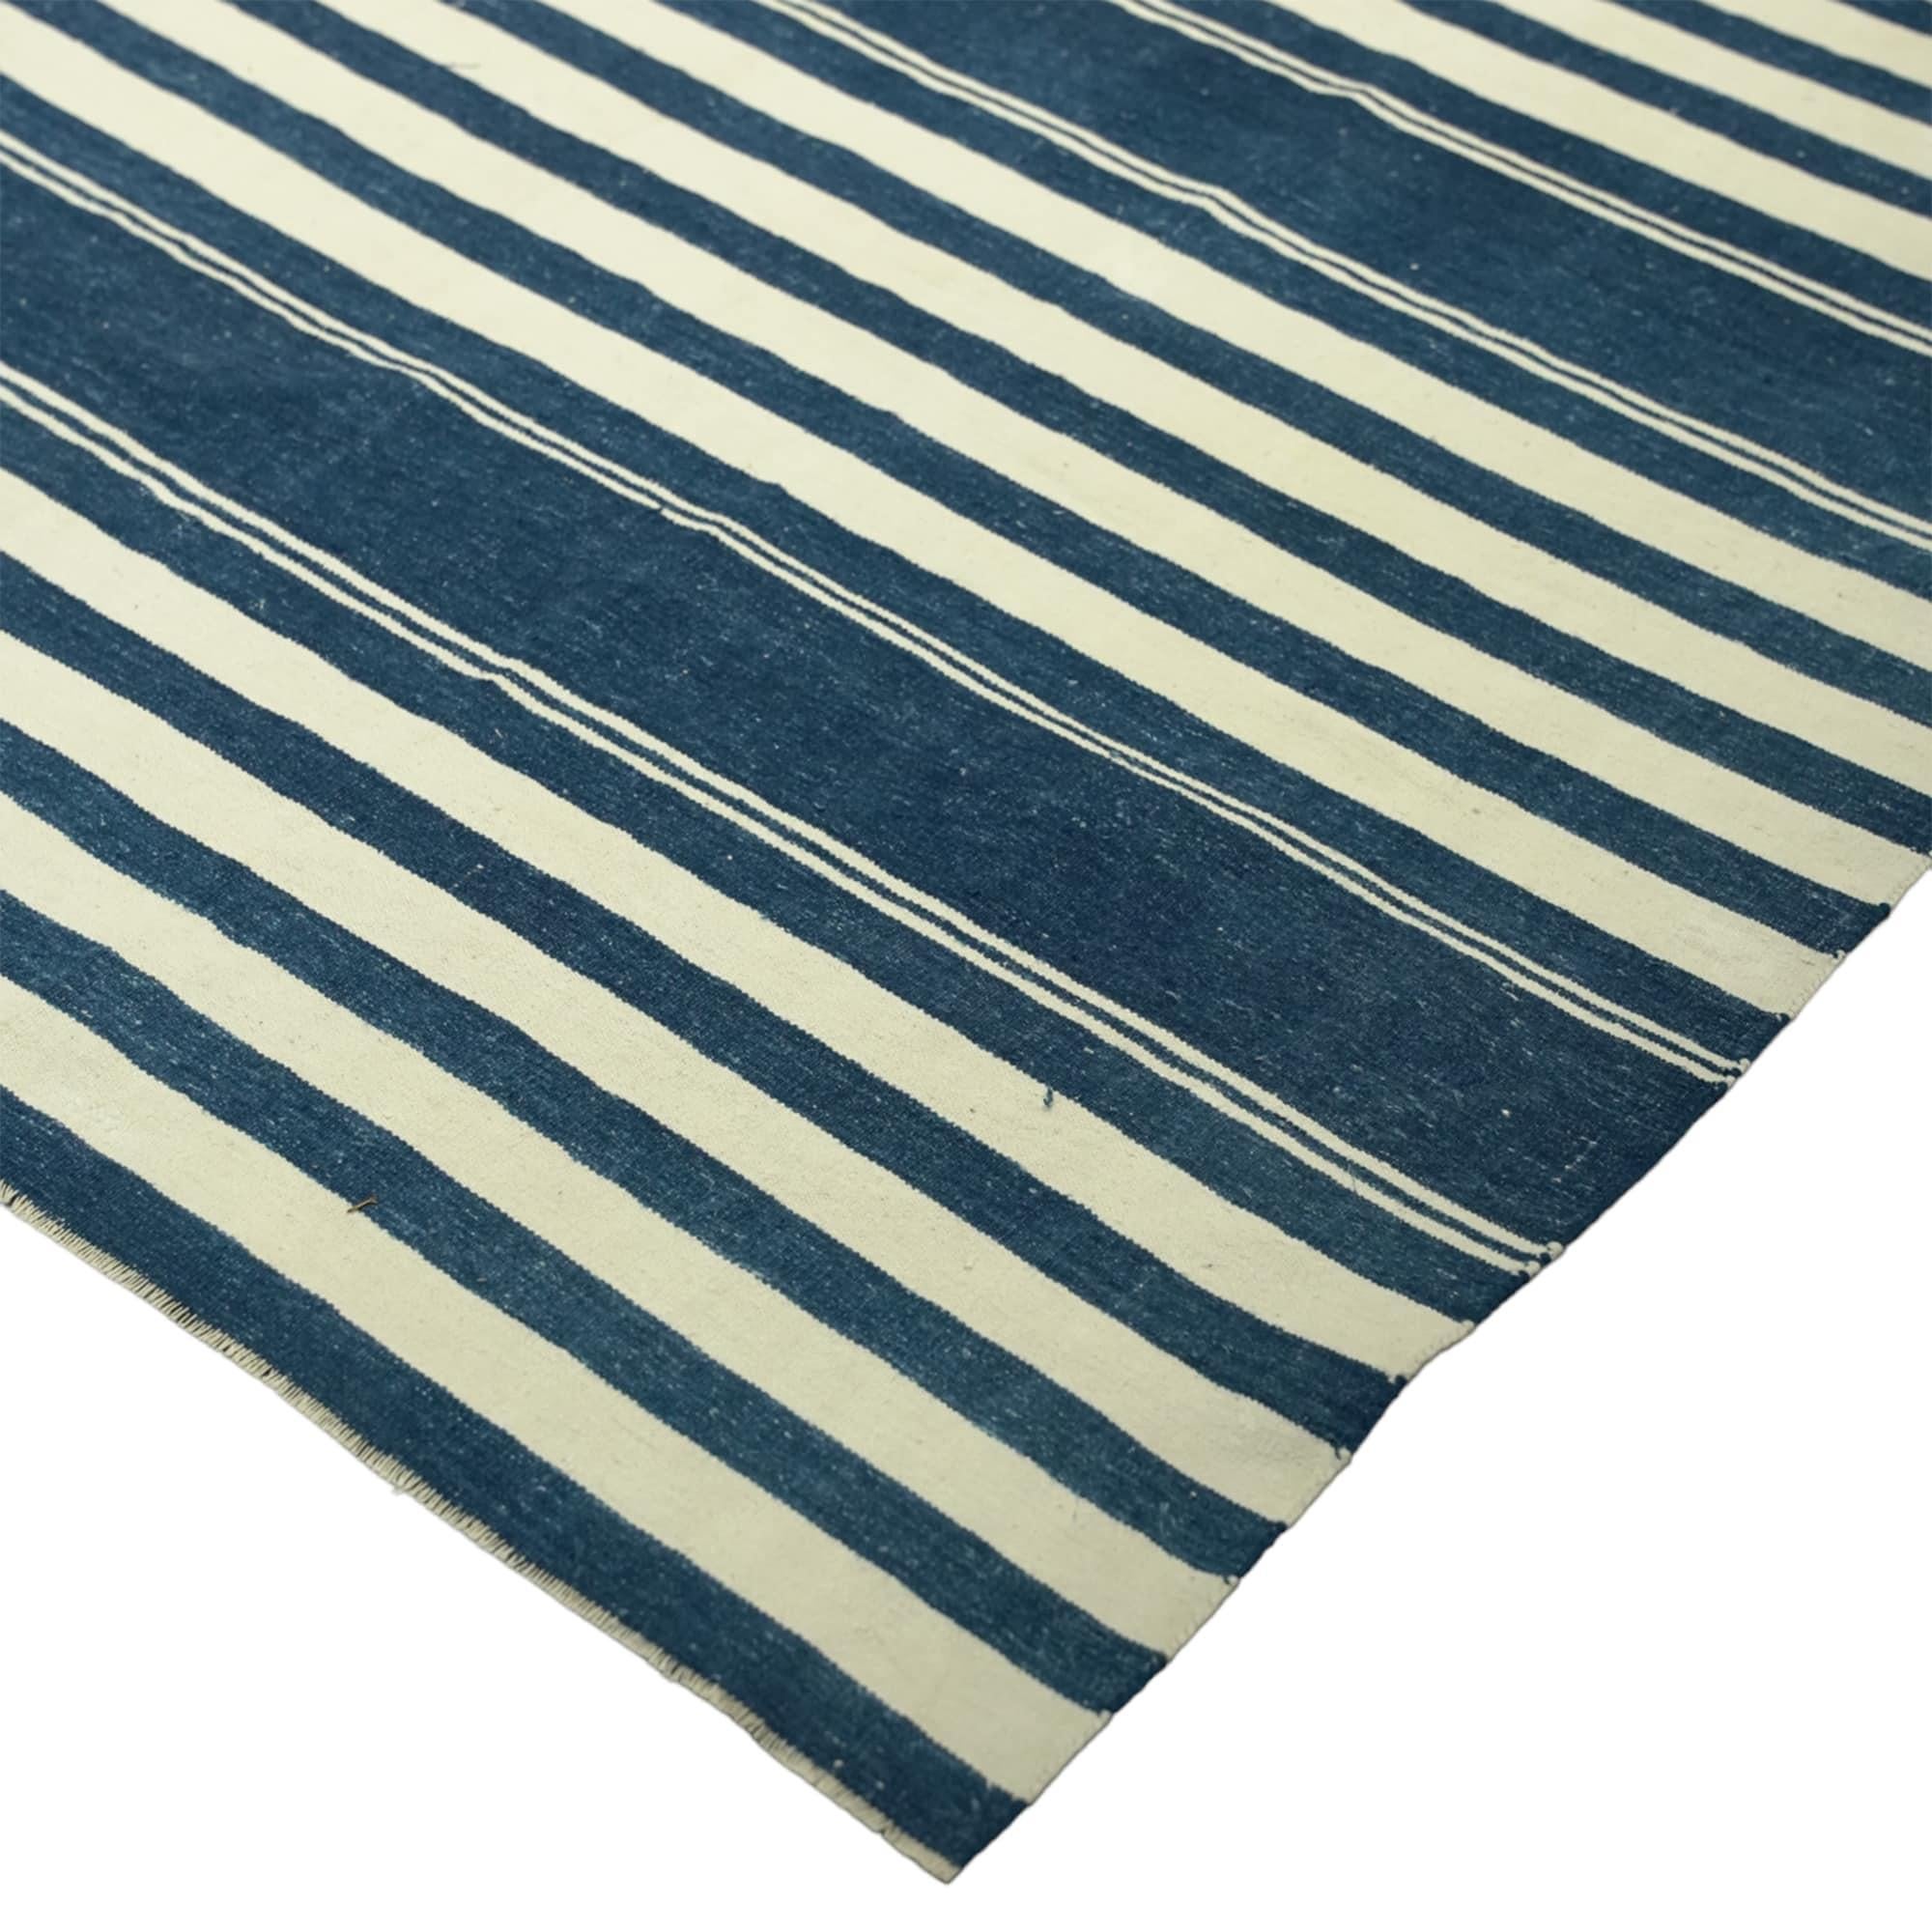 Indian Vintage Dhurrie Rug with White and Blue Stripes, from Rug & Kilim For Sale